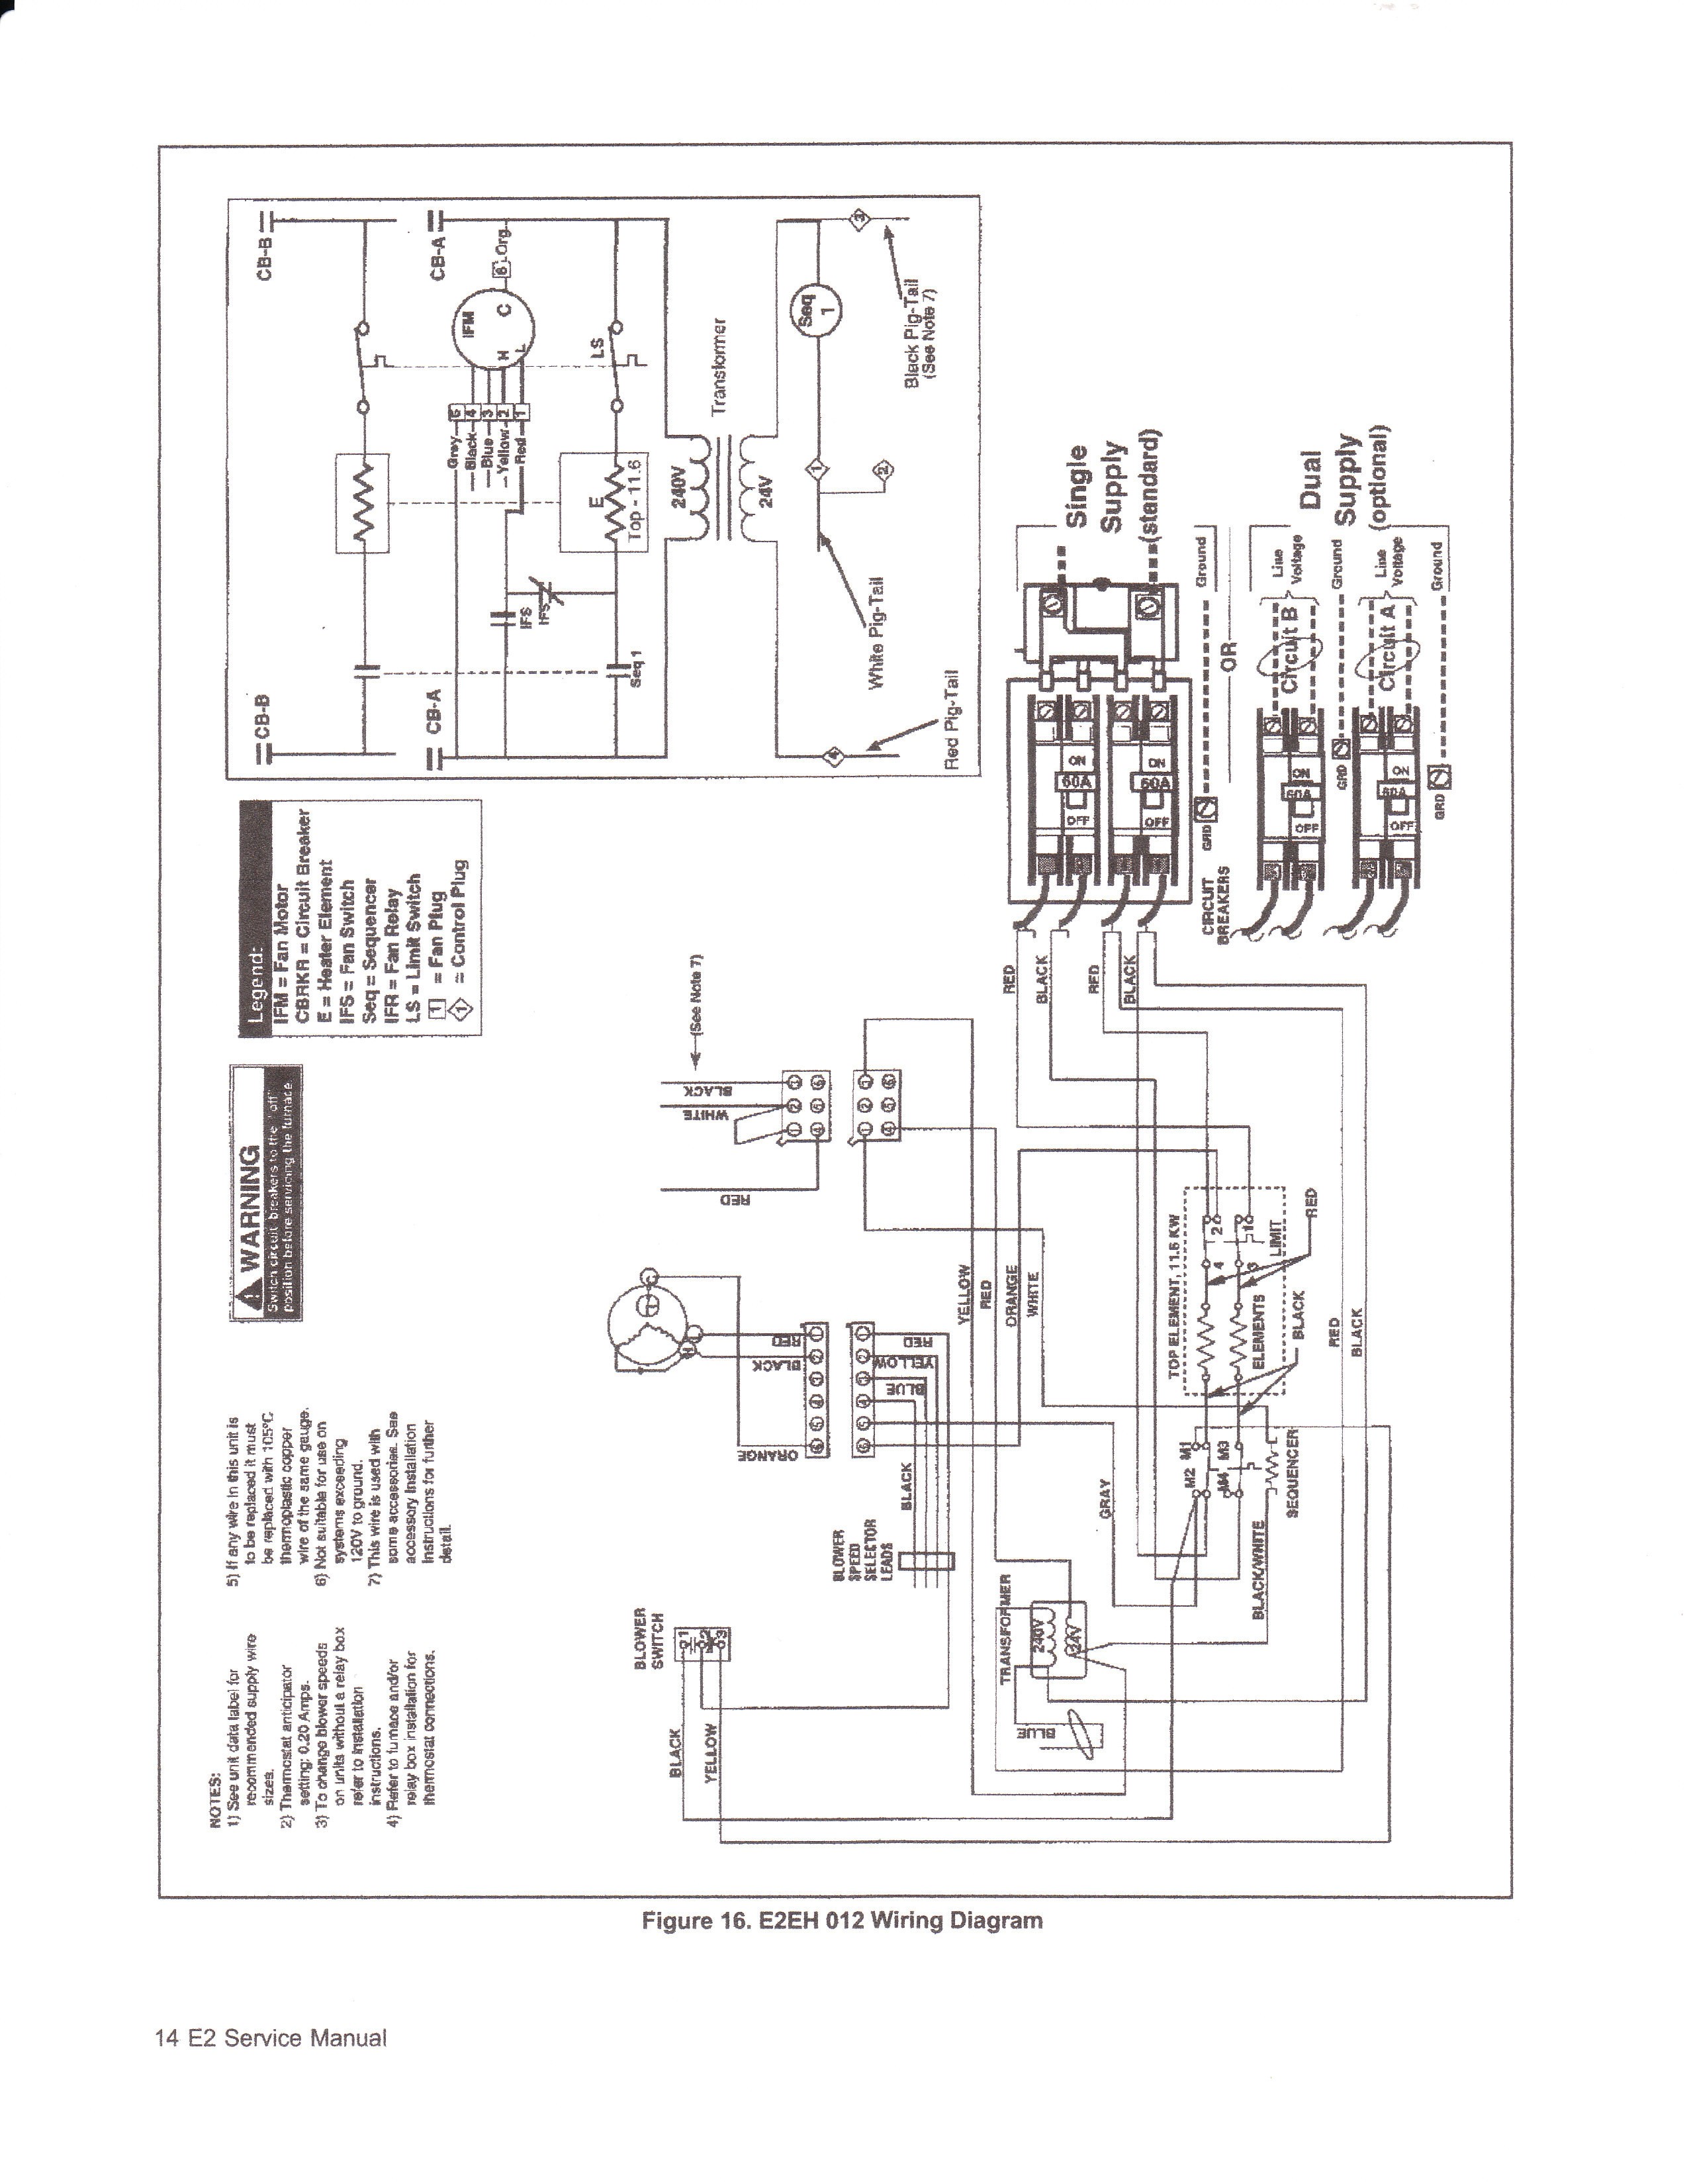 Electric Furnace Wiring Diagram Sequencer Valid Wiring Diagram For Furnace With Ac New Electric Furnace Wiring